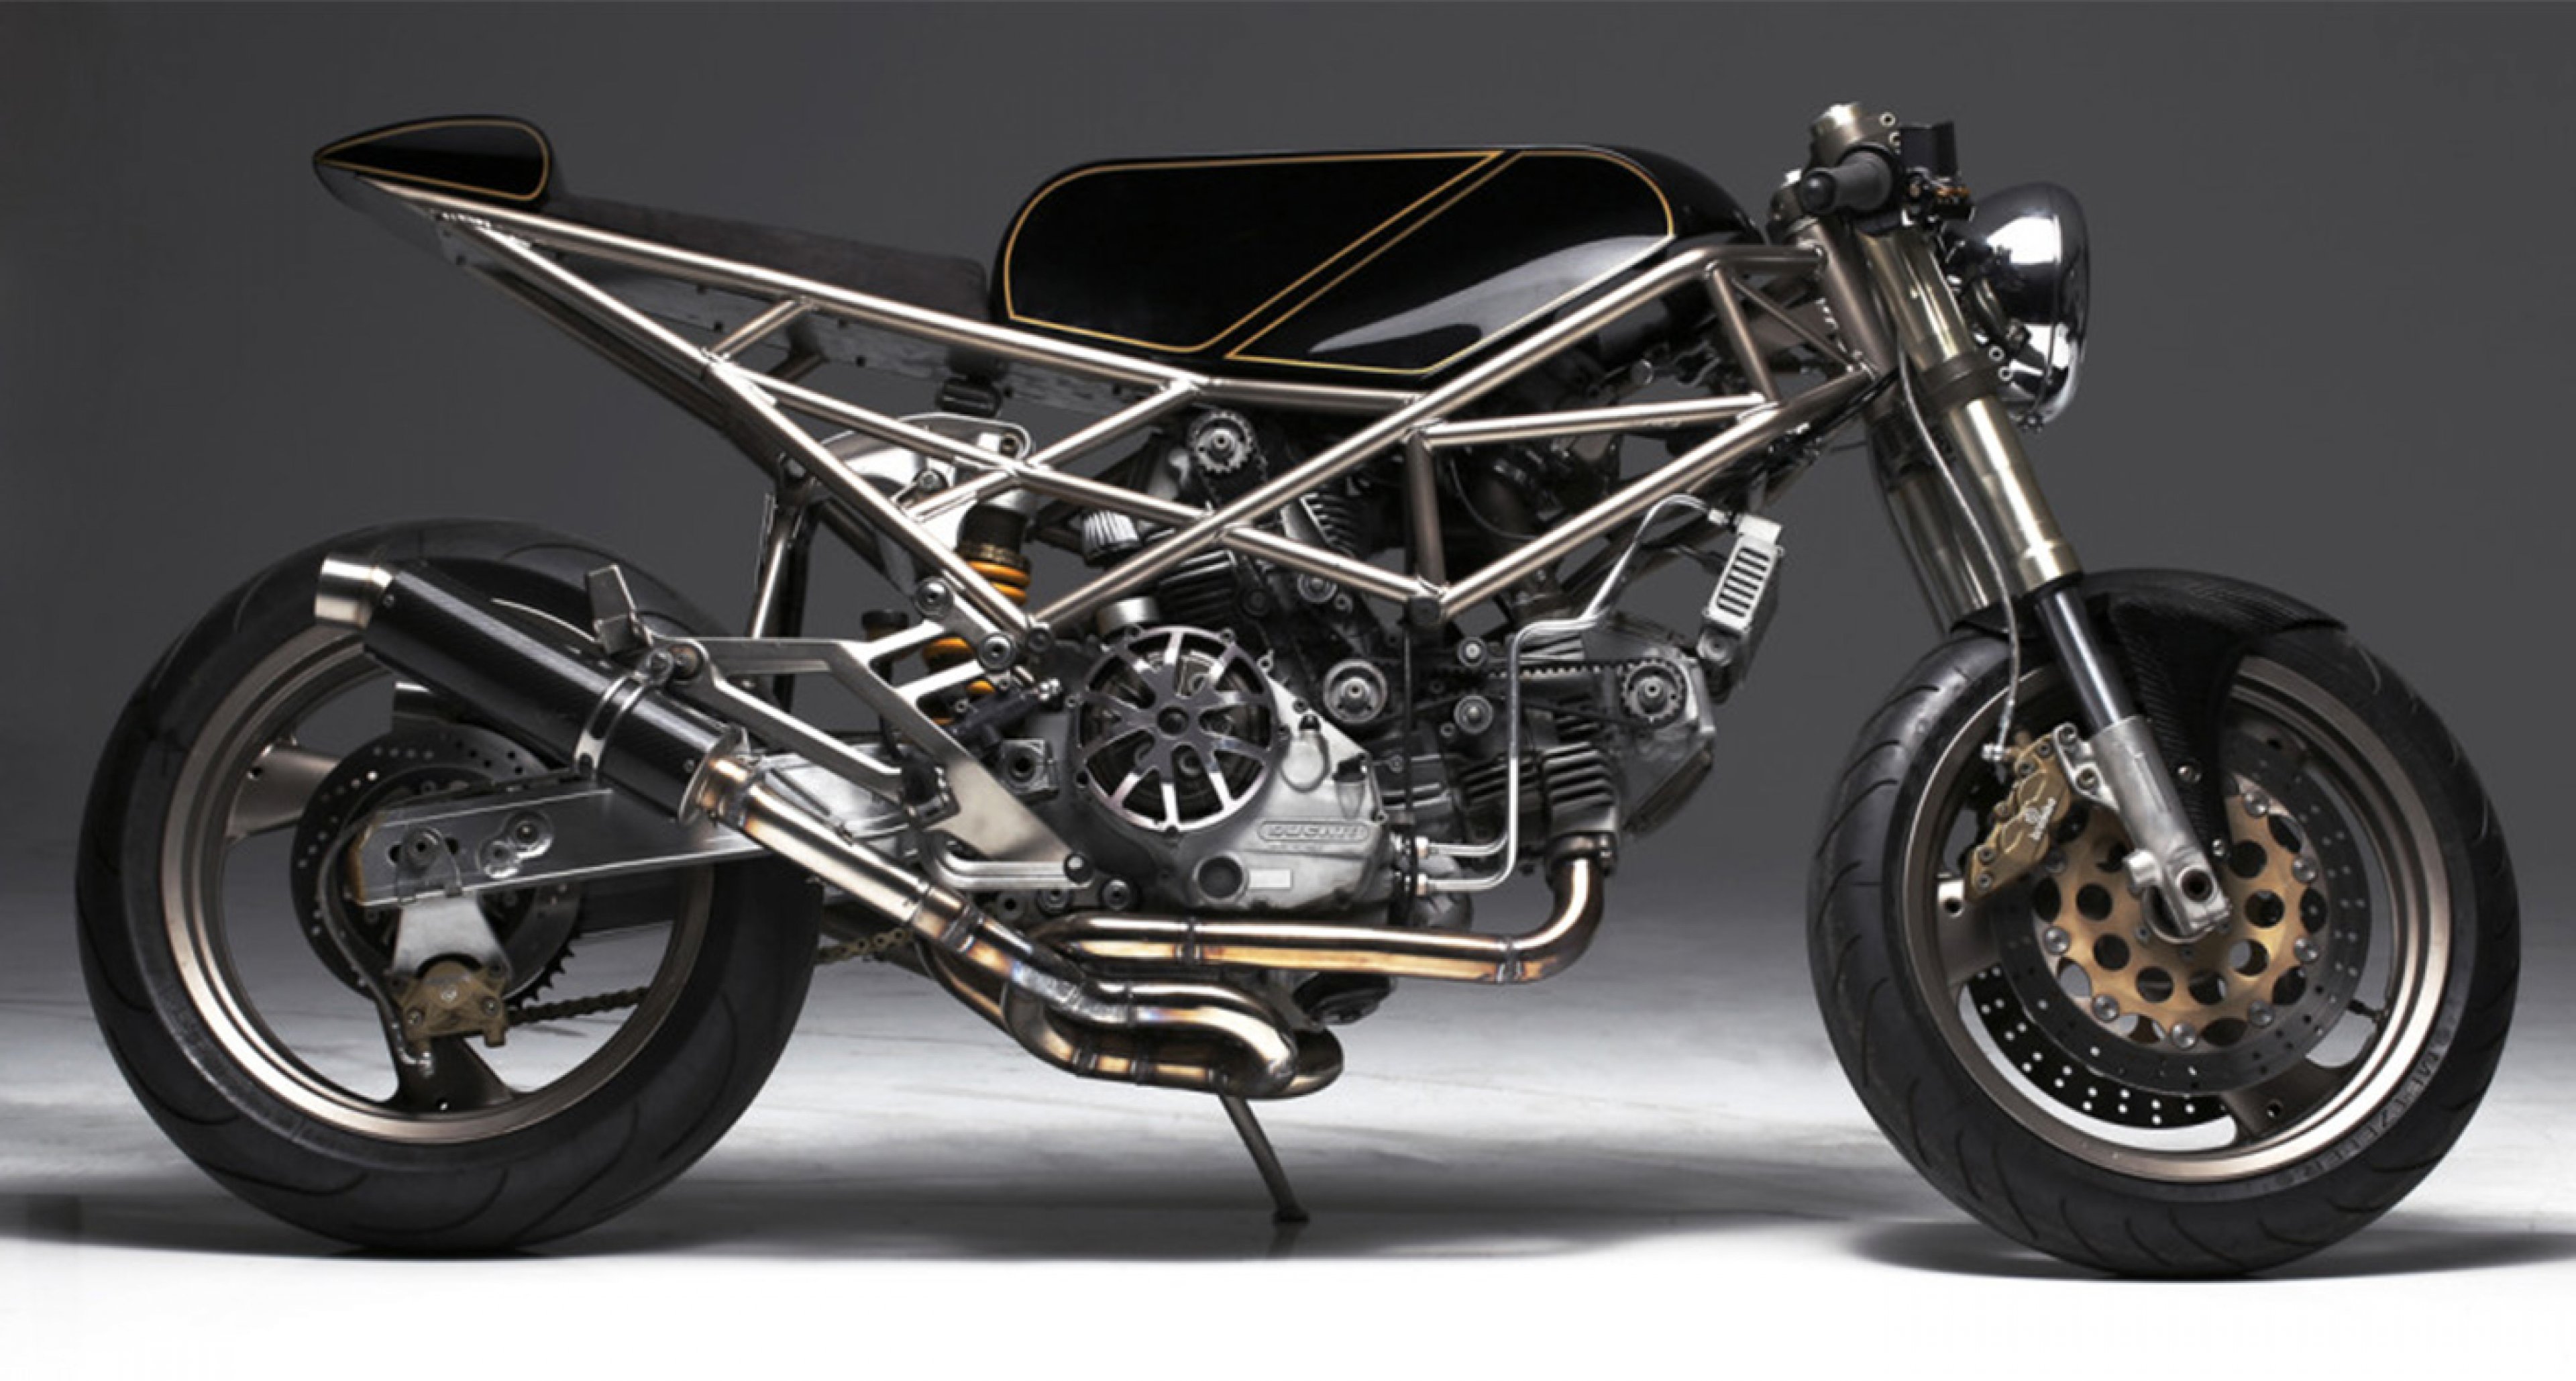 Cafe Racer 76 These Ducati Monster Makeovers Are A Fright Night Delight